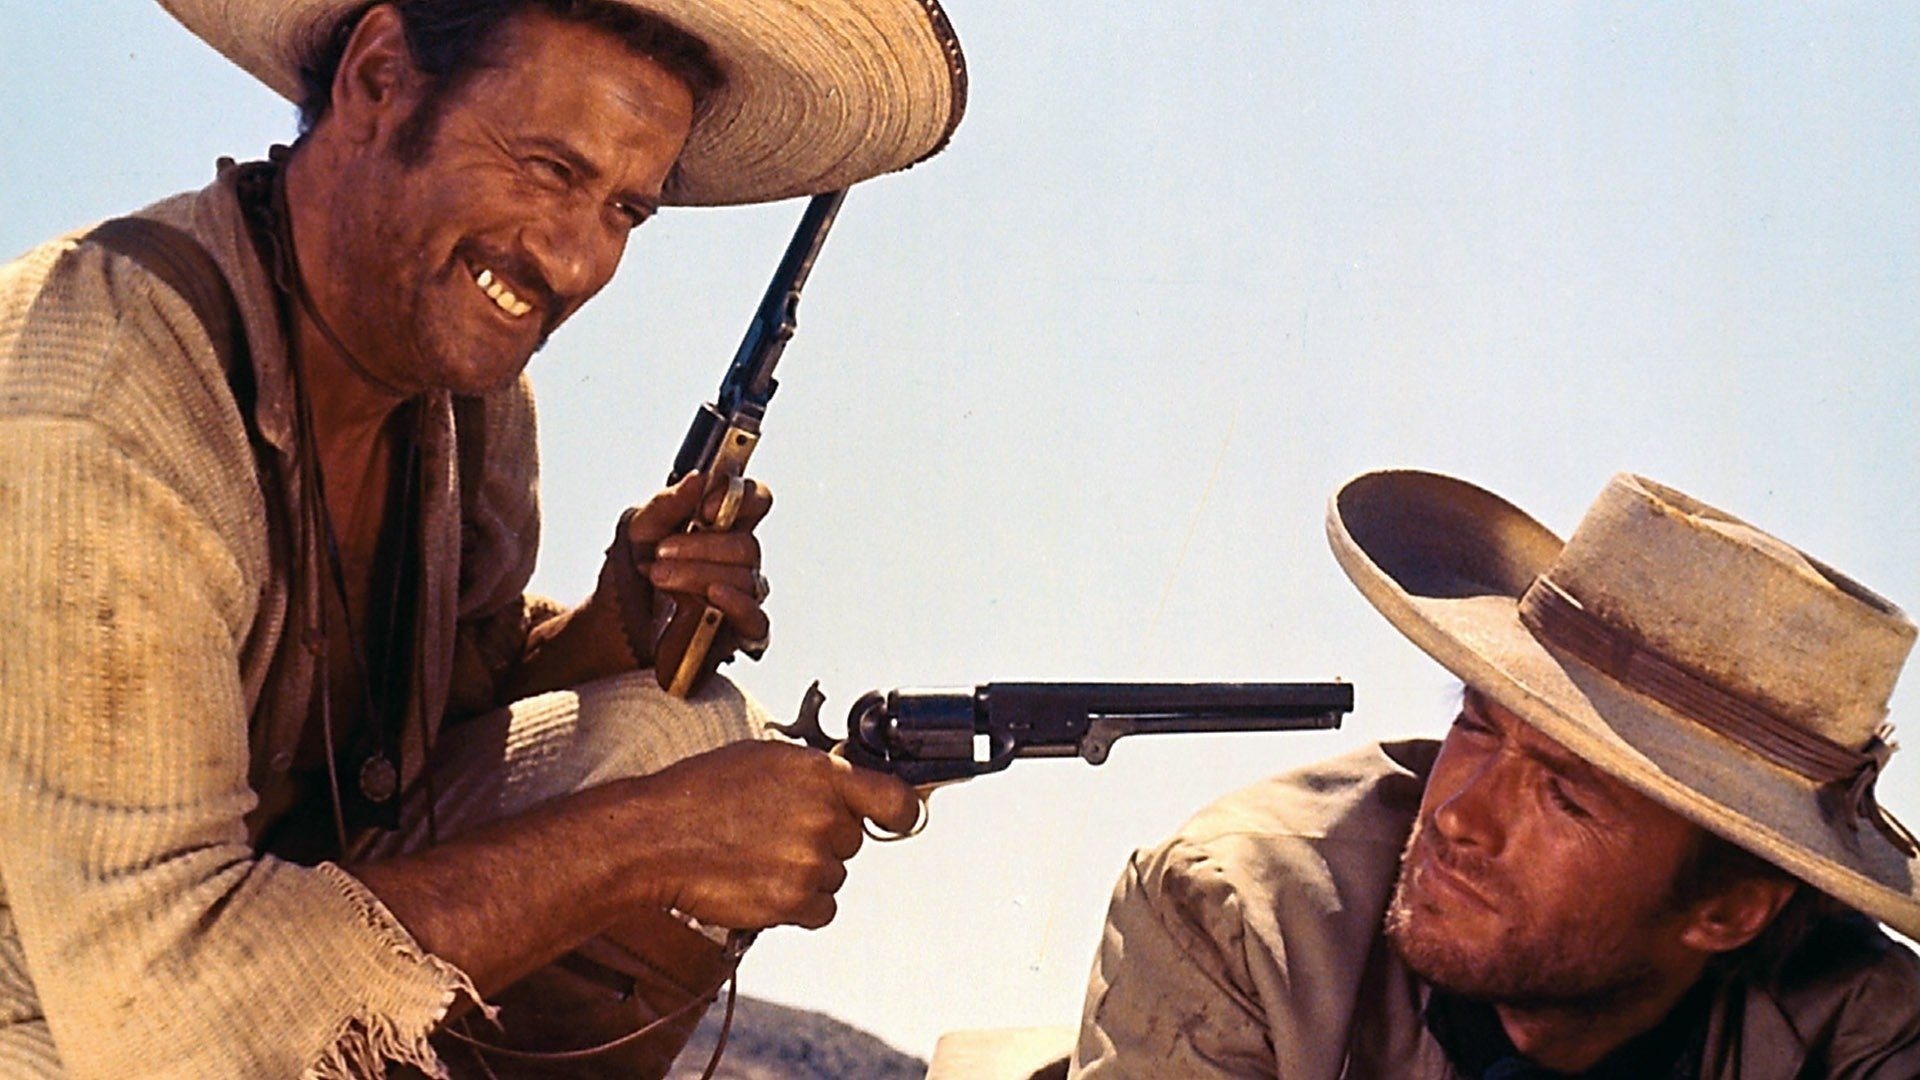 The Good, The Bad And The Ugly, Classic Western film, Sergio Leone masterpiece, Clint Eastwood, 1920x1080 Full HD Desktop